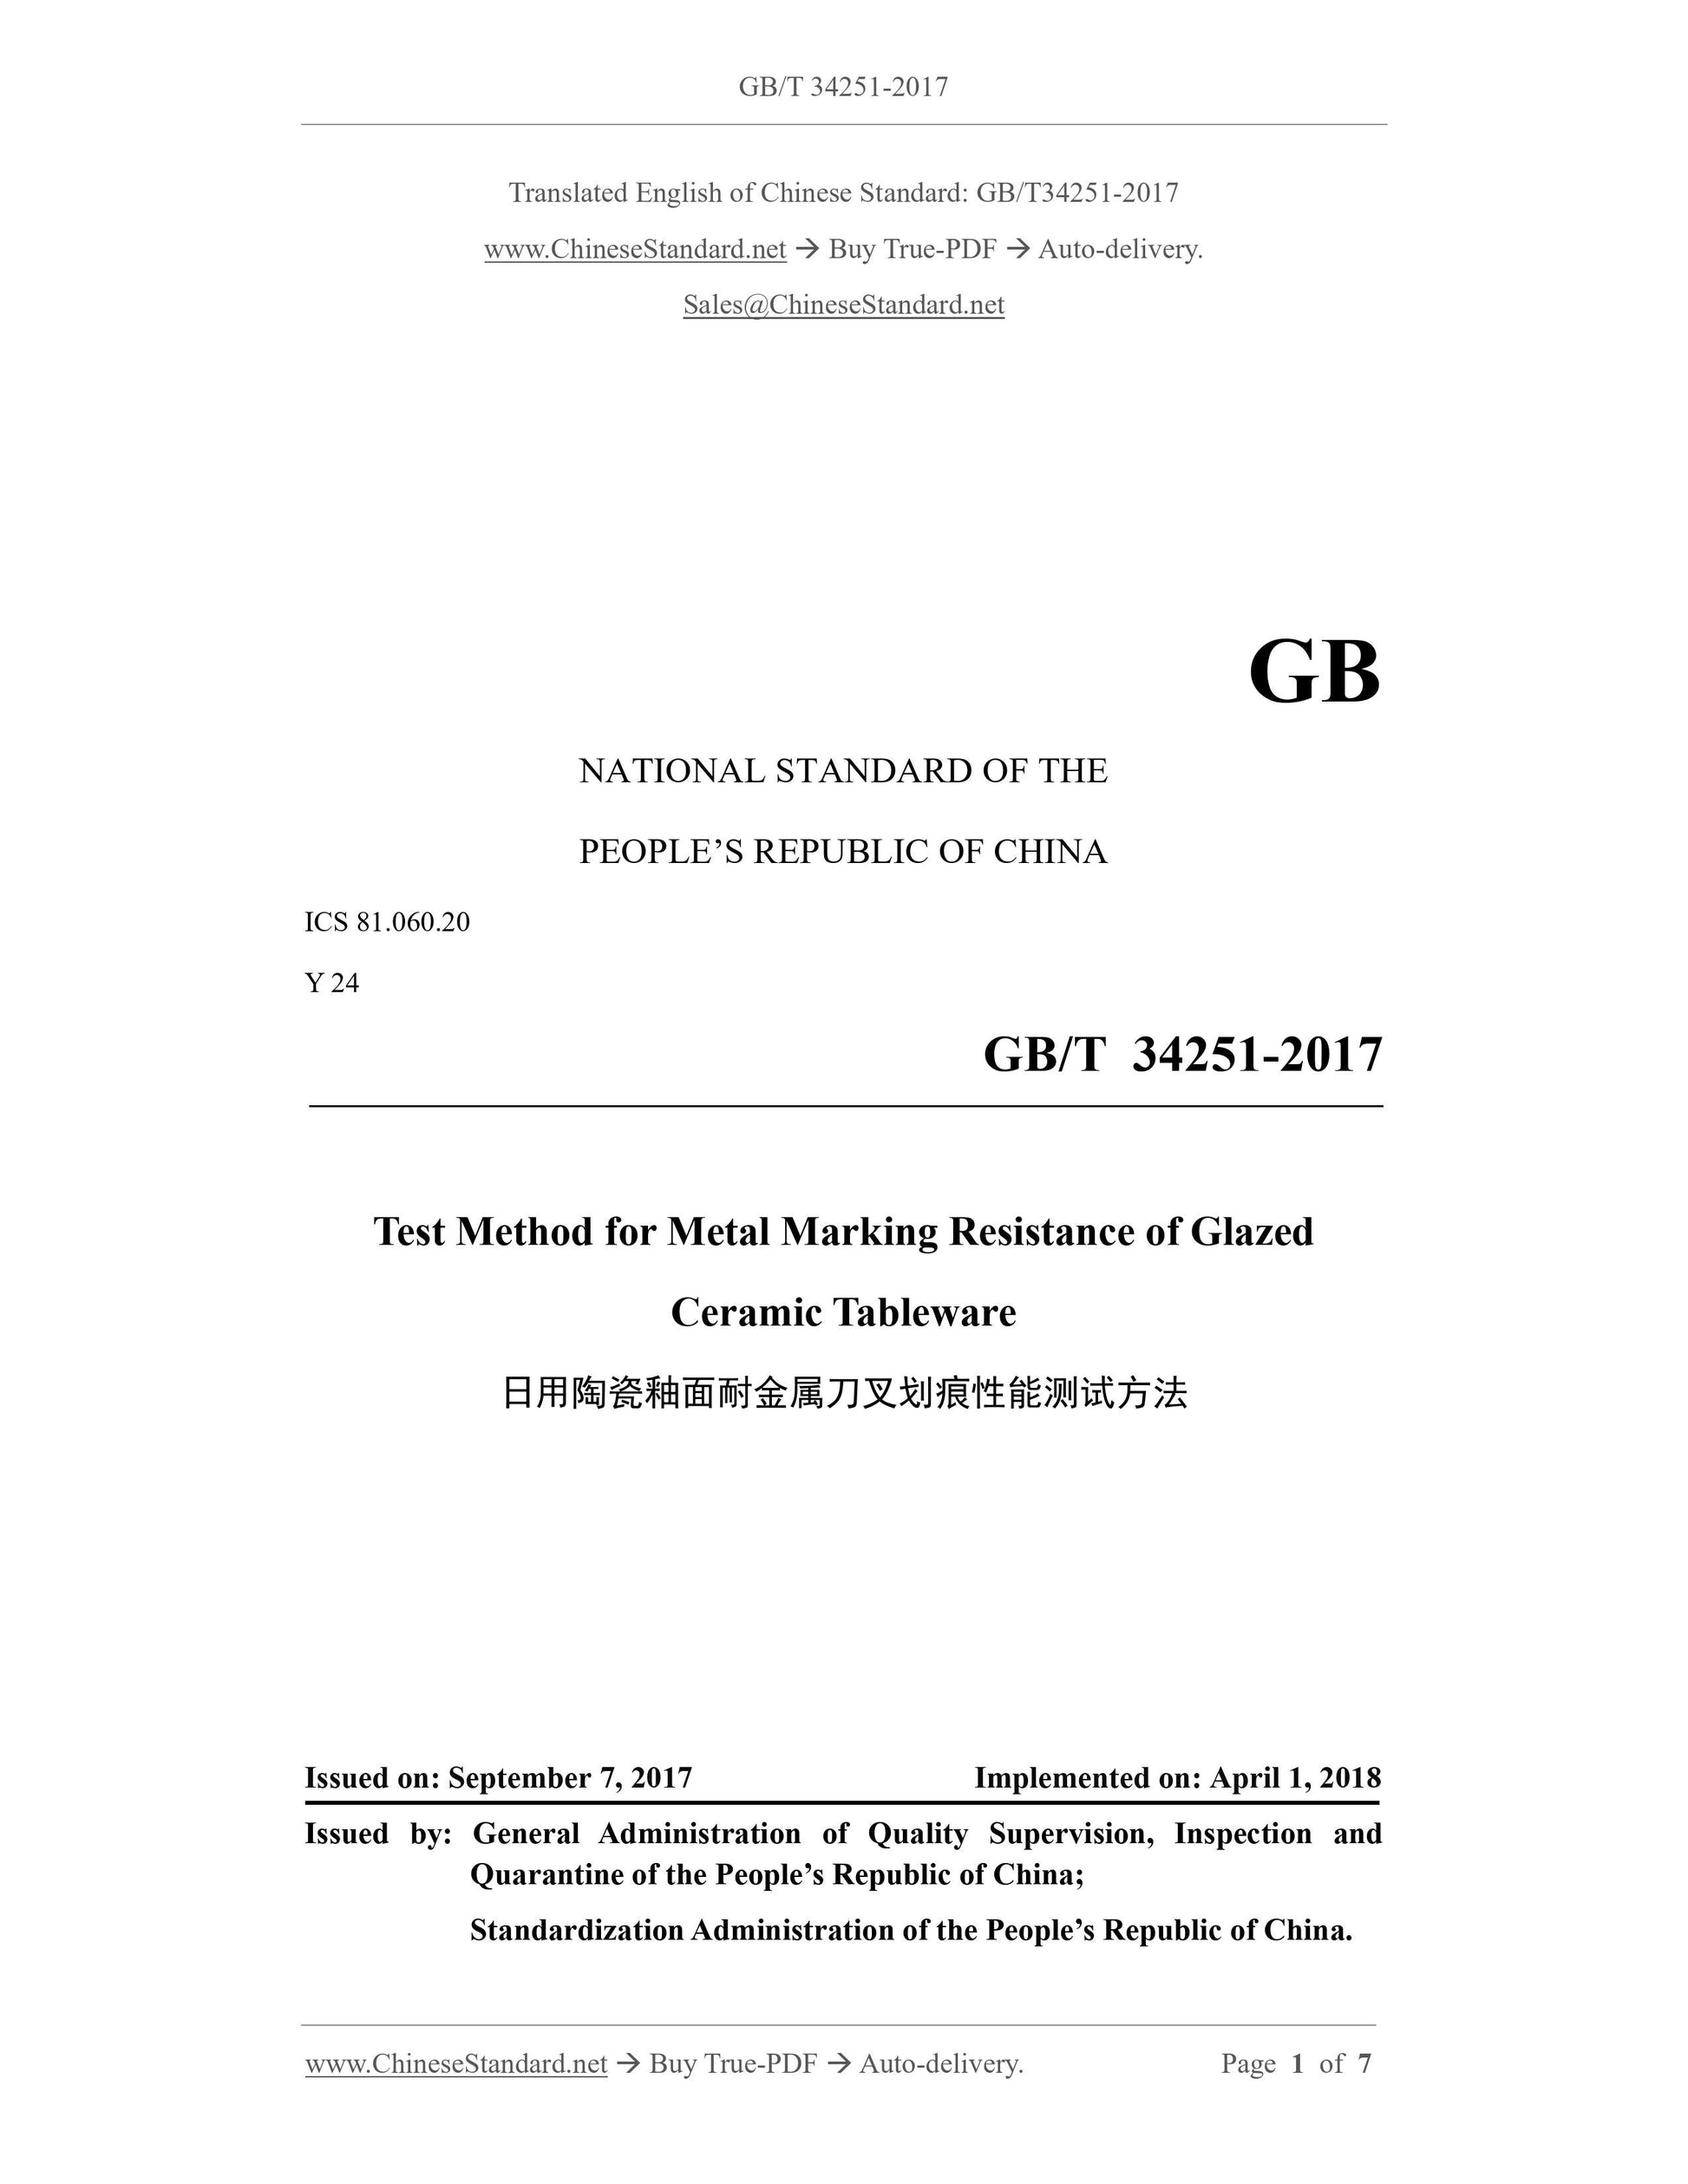 GB/T 34251-2017 Page 1